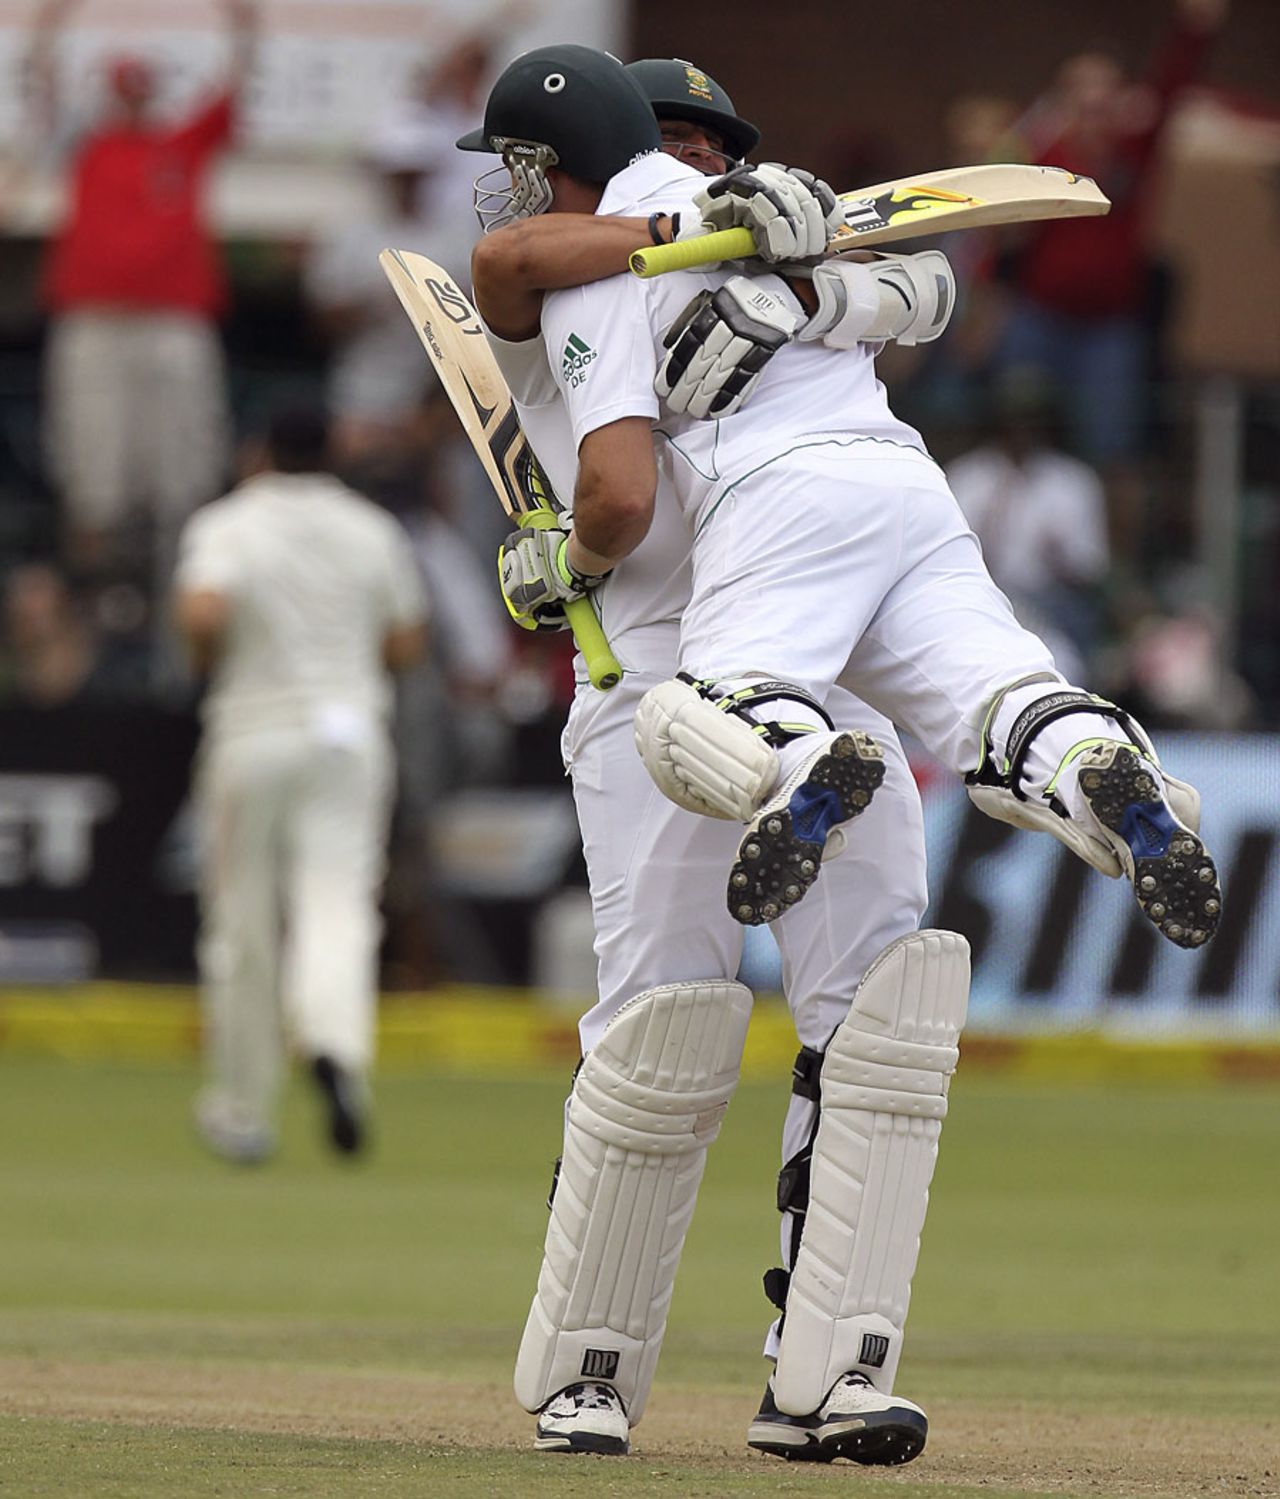 Dean Elgar gets lifted up by Rory Kleinveldt after reaching his hundred, South Africa v New Zealand, 2nd Test, Port Elizabeth, 2nd day, January 12, 2013